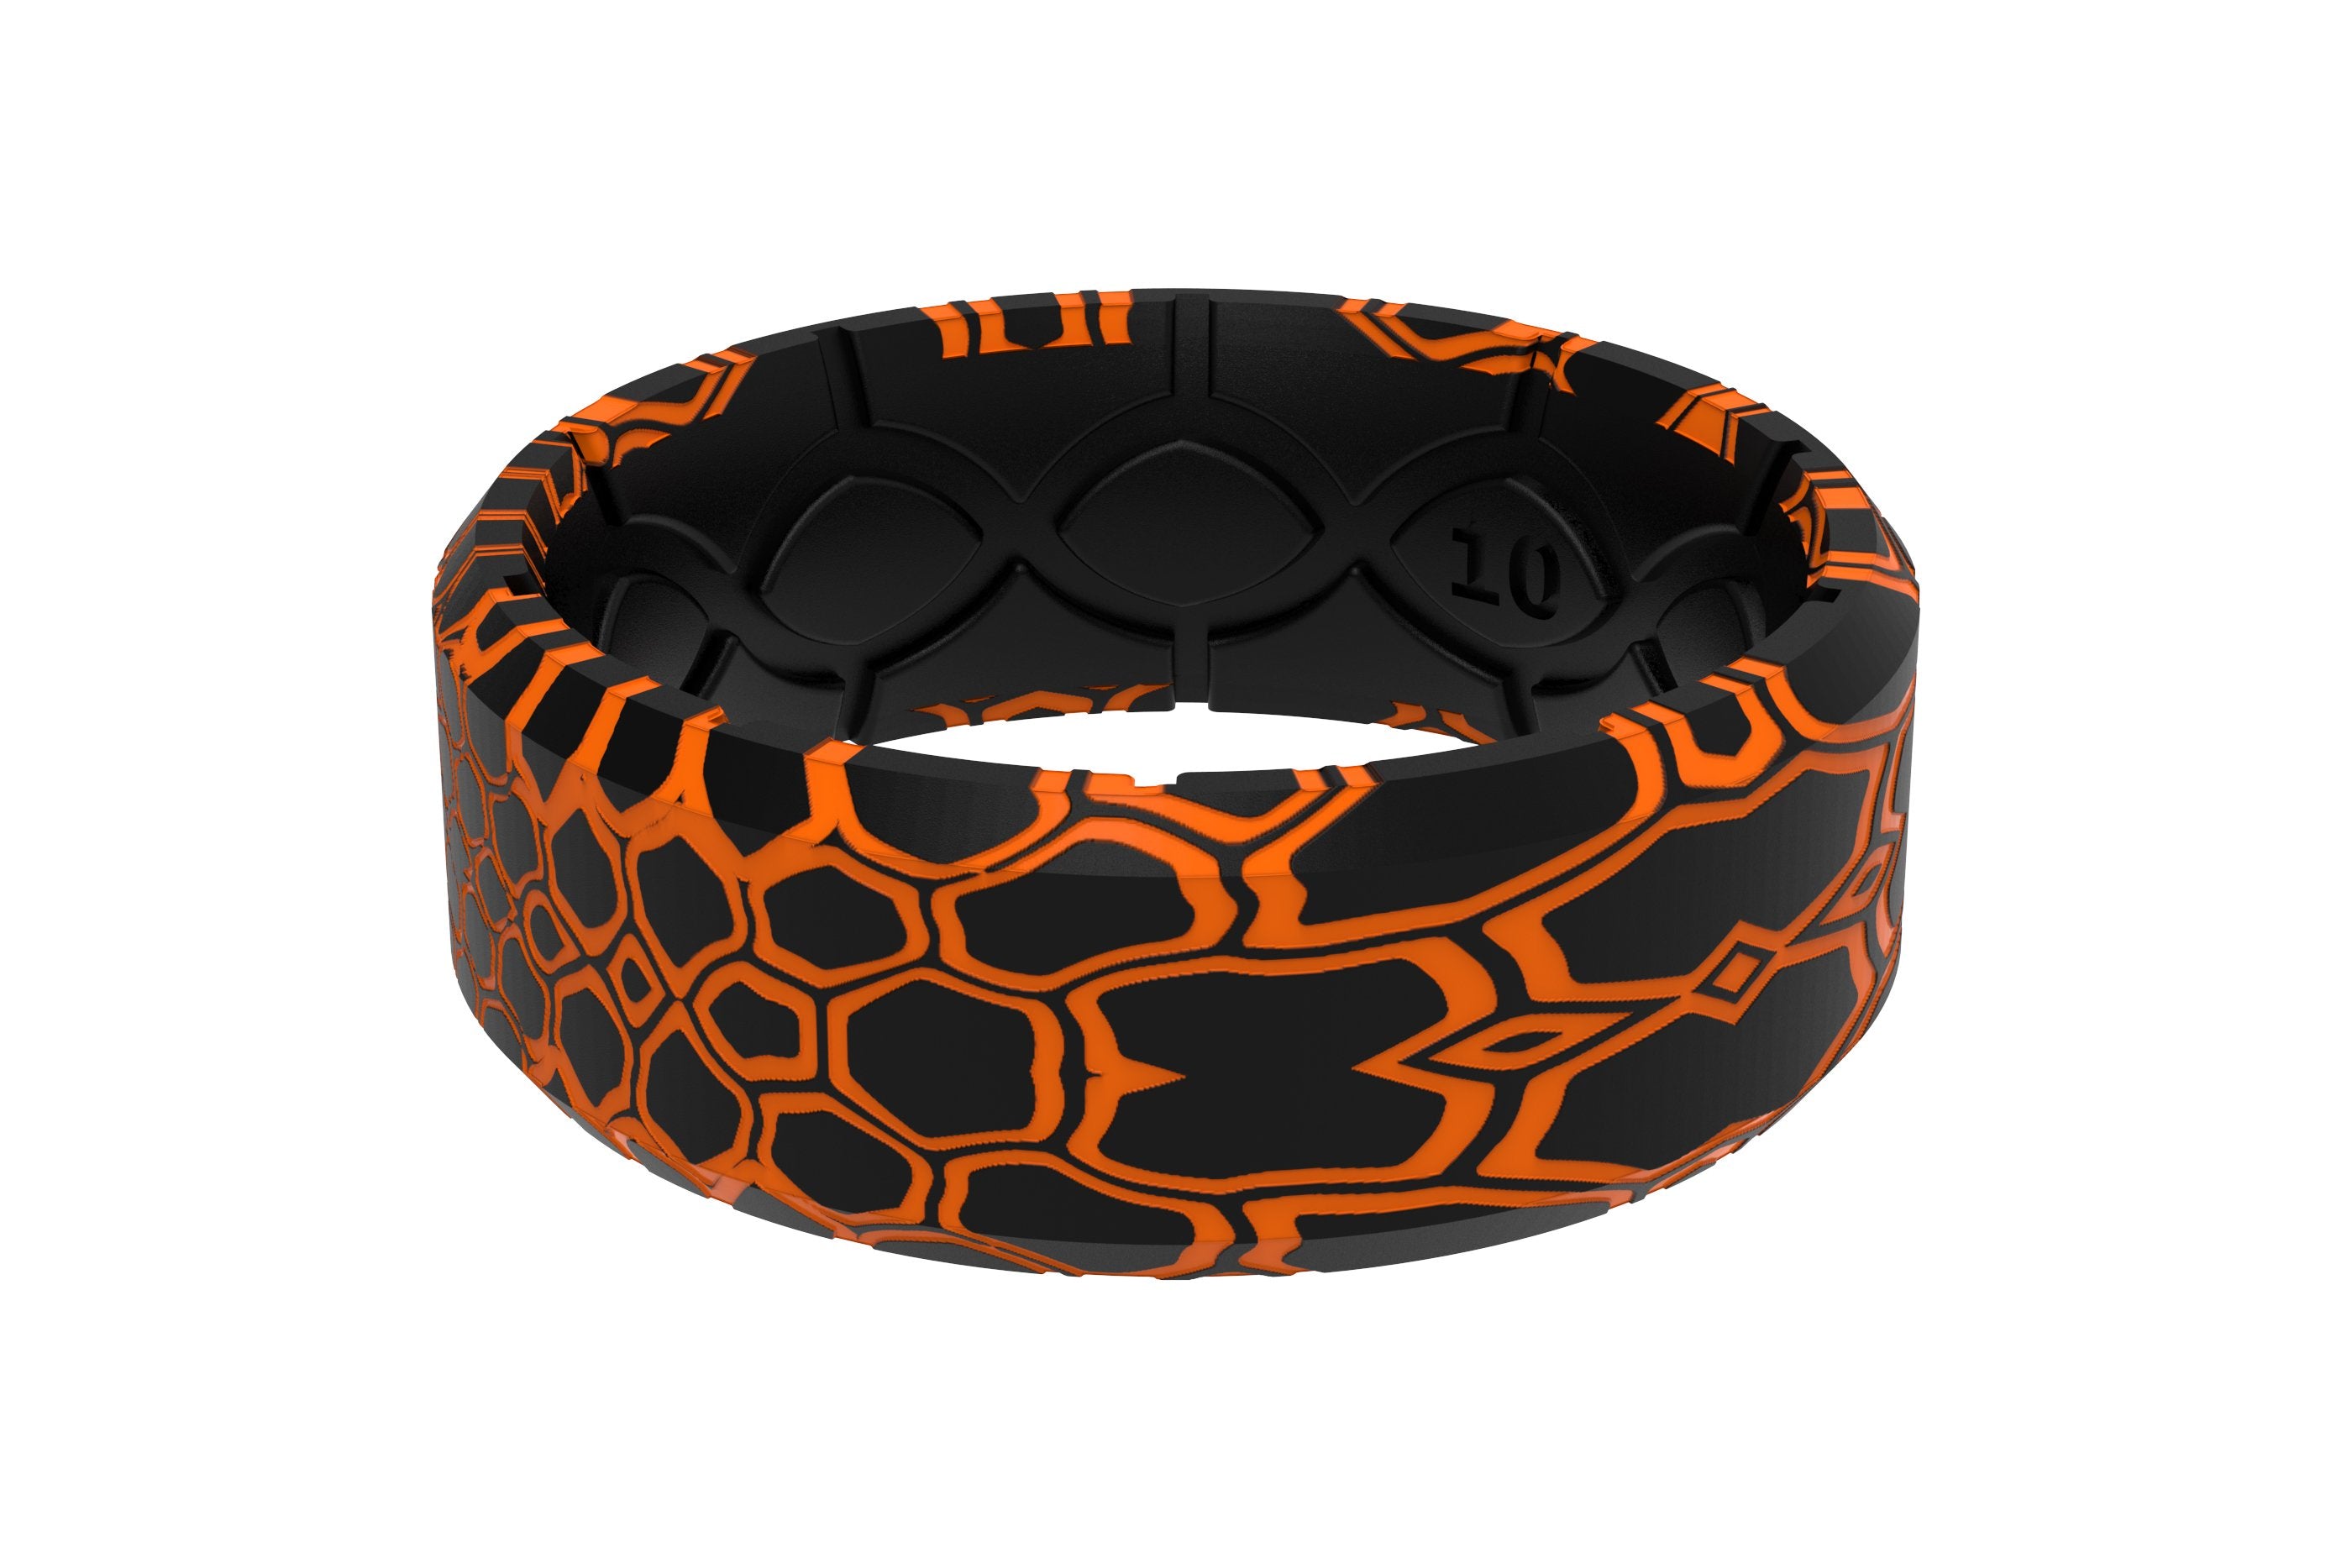 Kryptek Inferno 3D Camo Groove Ring side view